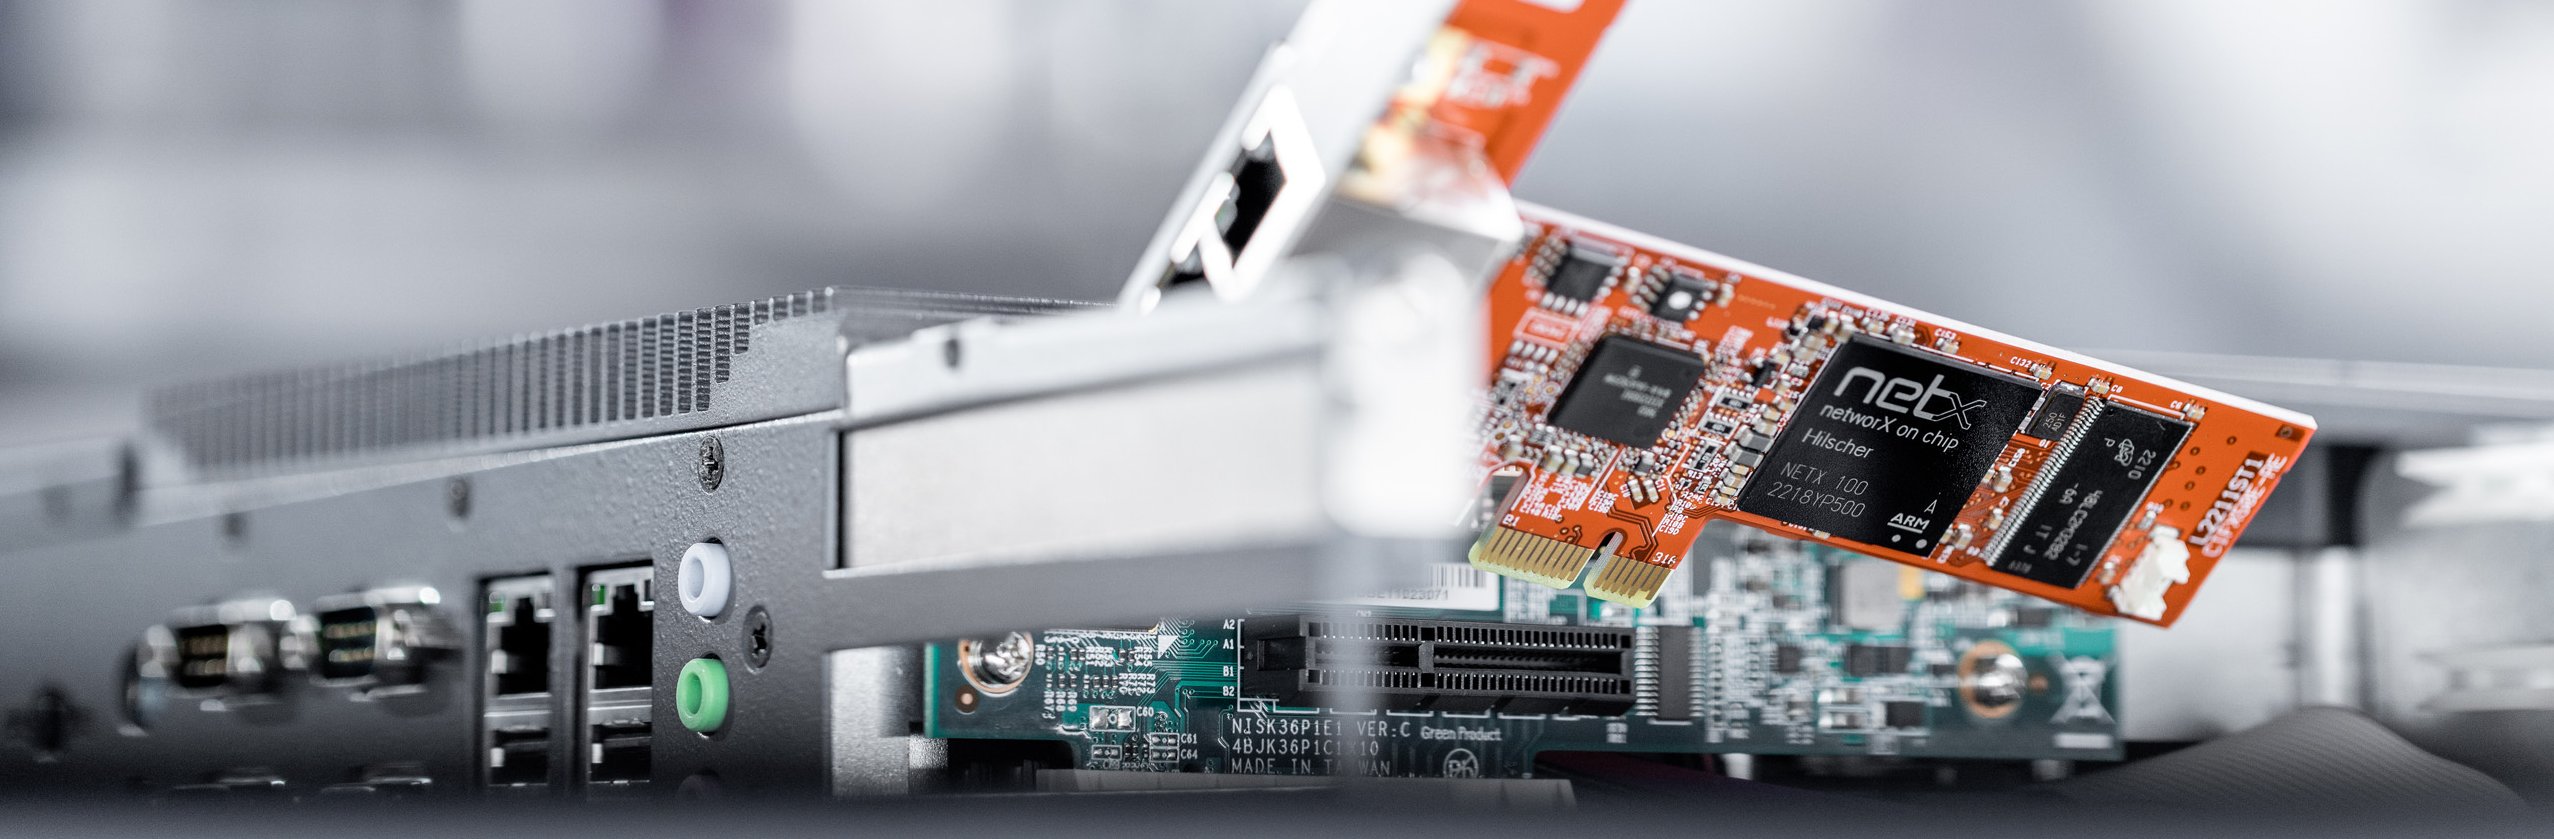 cifX PC cards are the easiest way to integrate your systems into an industrial network.